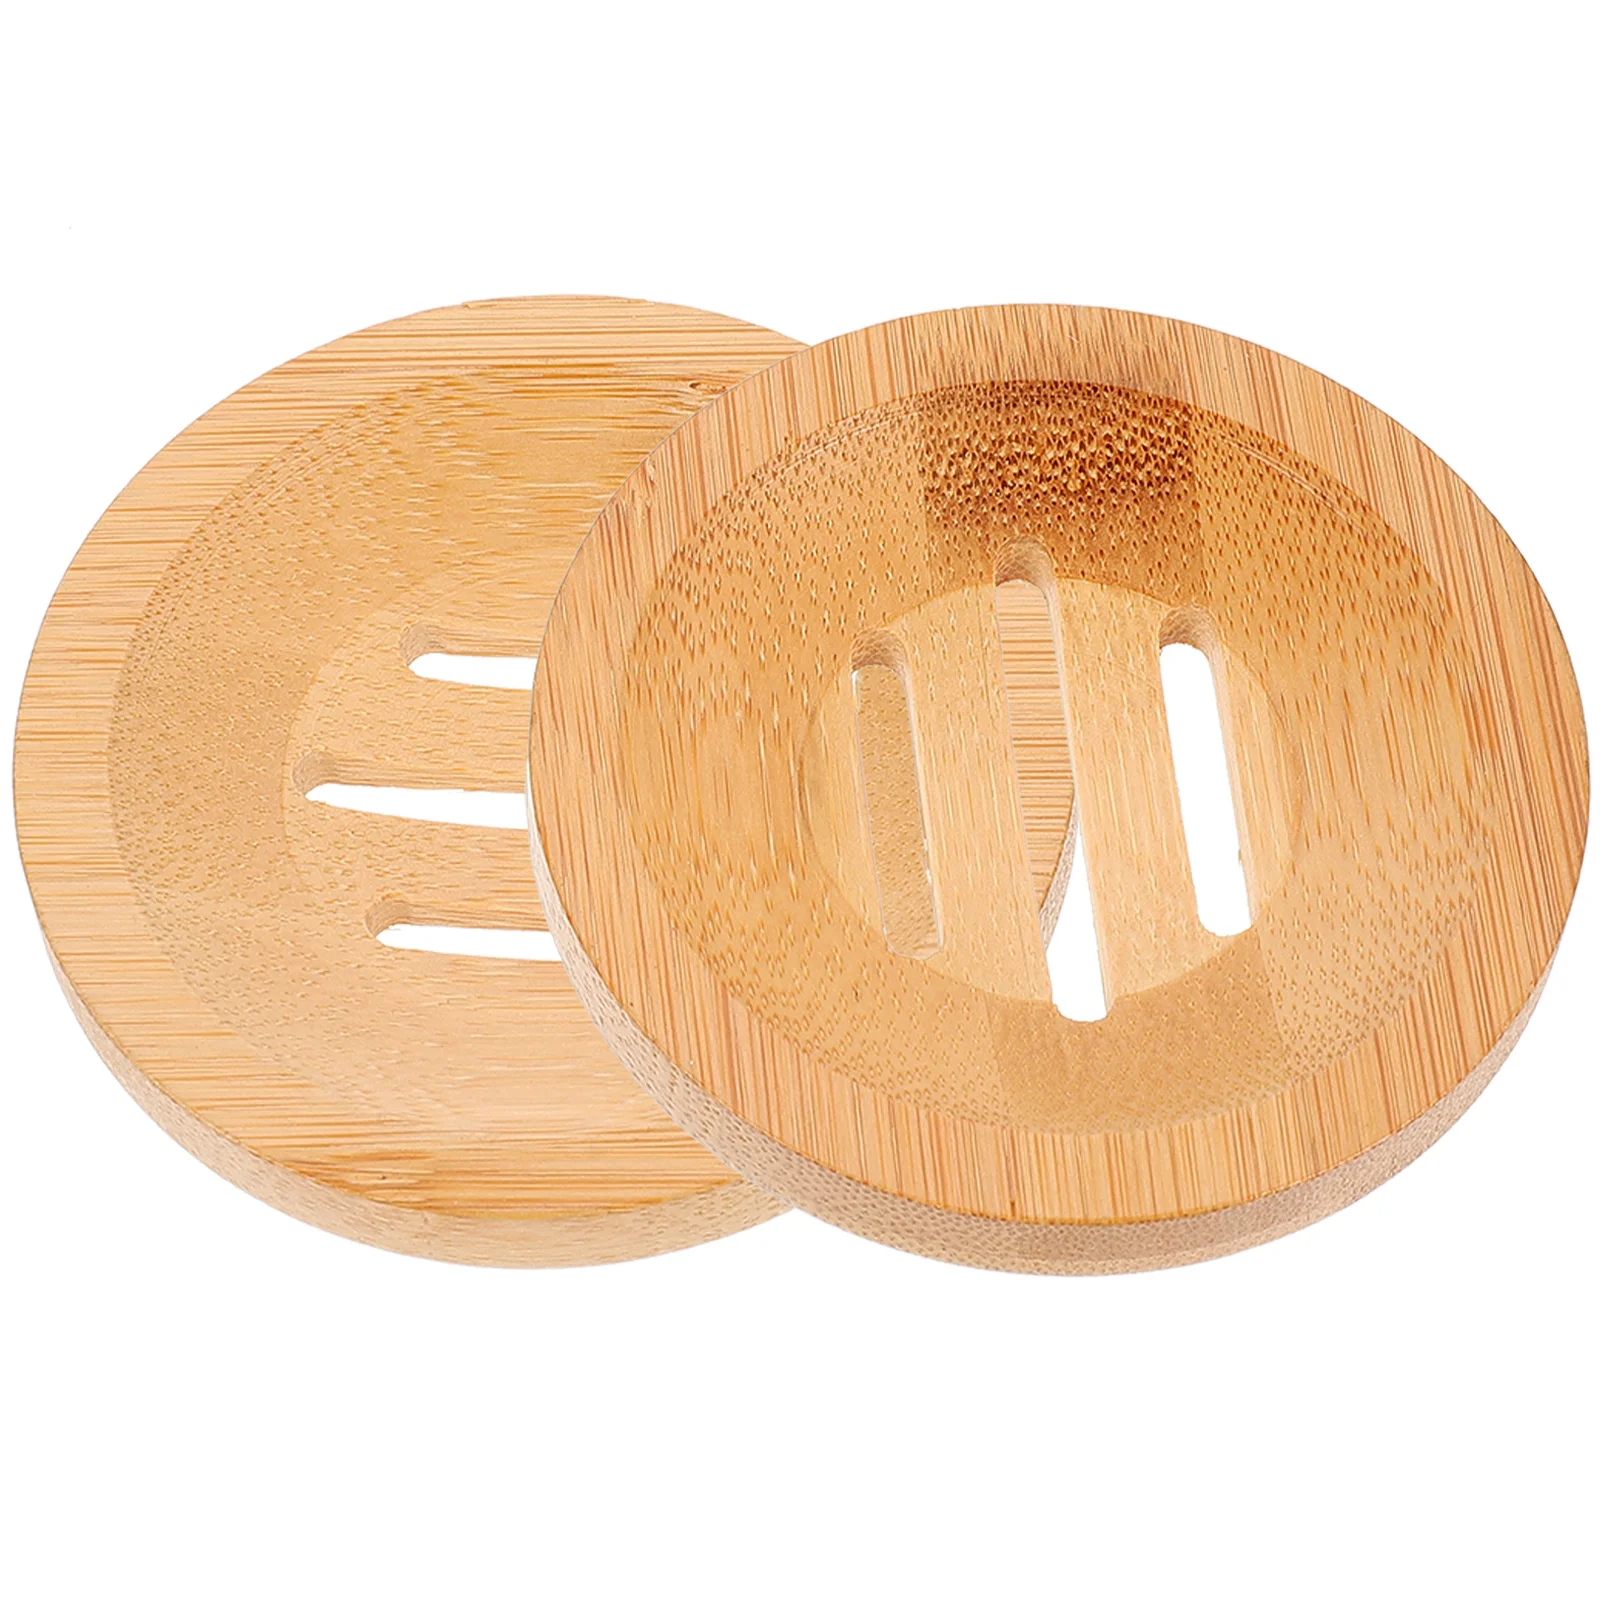 

2 Pcs Wooden Soap Box Draining Shower Bathroom Holder Cutlery Drainer Bamboo Holders Serving Trays Sponge Self Container Saver